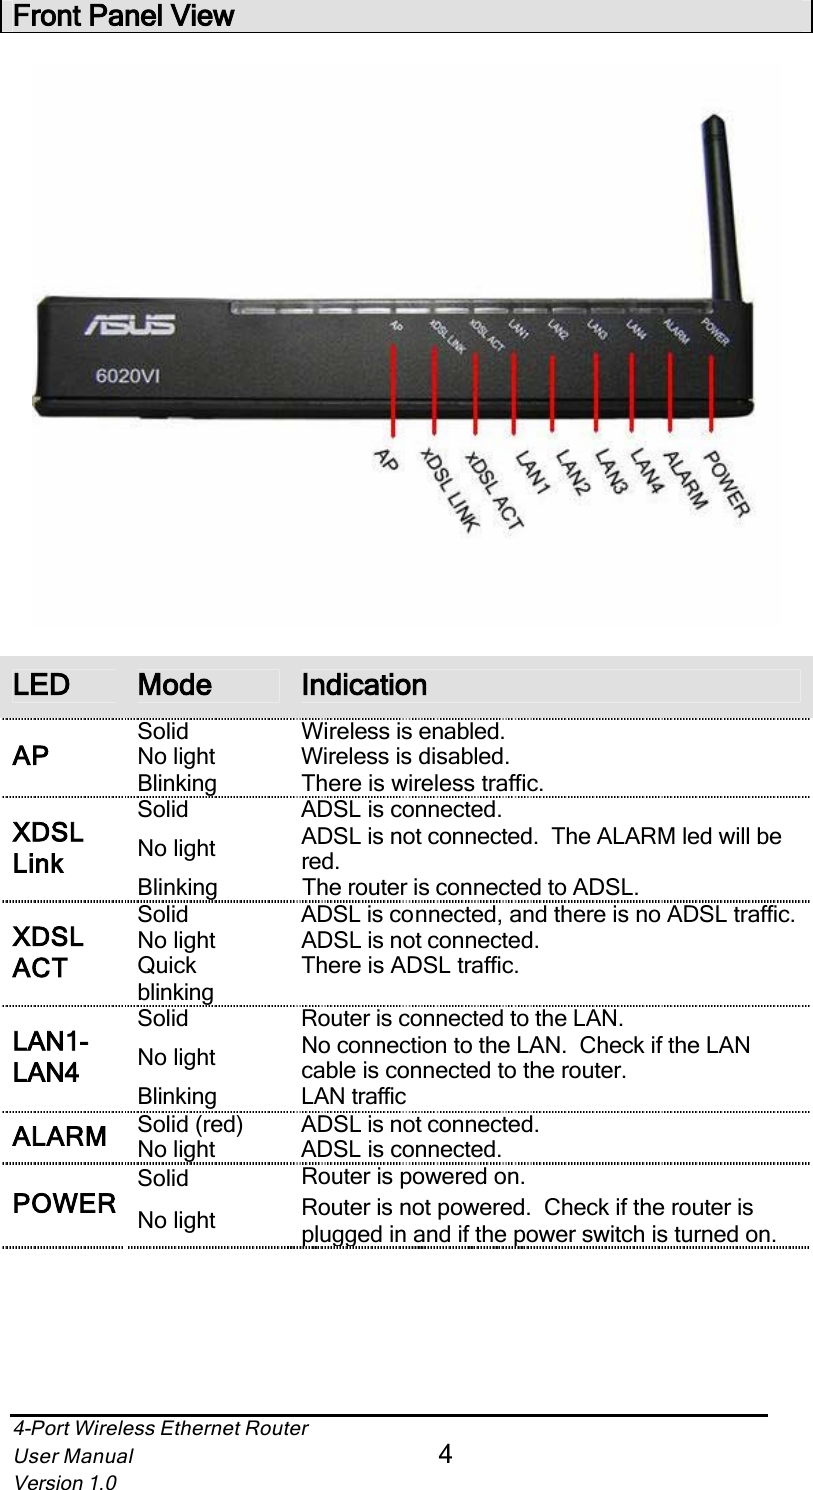 4-Port Wireless Ethernet RouterUser Manual4Version 1.0Front Panel ViewLED Mode IndicationSolid Wireless is enabled.No light Wireless is disabled.APBlinking There is wireless traffic.Solid ADSL is connected.No light ADSL is not connected.  The ALARM led will be red.XDSLLinkBlinking The router is connected to ADSL.Solid ADSL is connected, and there is no ADSL traffic.No light ADSL is not connected.XDSLACT QuickblinkingThere is ADSL traffic.Solid Router is connected to the LAN.No light No connection to the LAN.  Check if the LAN cable is connected to the router.LAN1-LAN4Blinking LAN trafficSolid (red) ADSL is not connected.ALARM No light ADSL is connected.Solid Router is powered on.POWER No light Router is not powered.  Check if the router is plugged in and if the power switch is turned on.